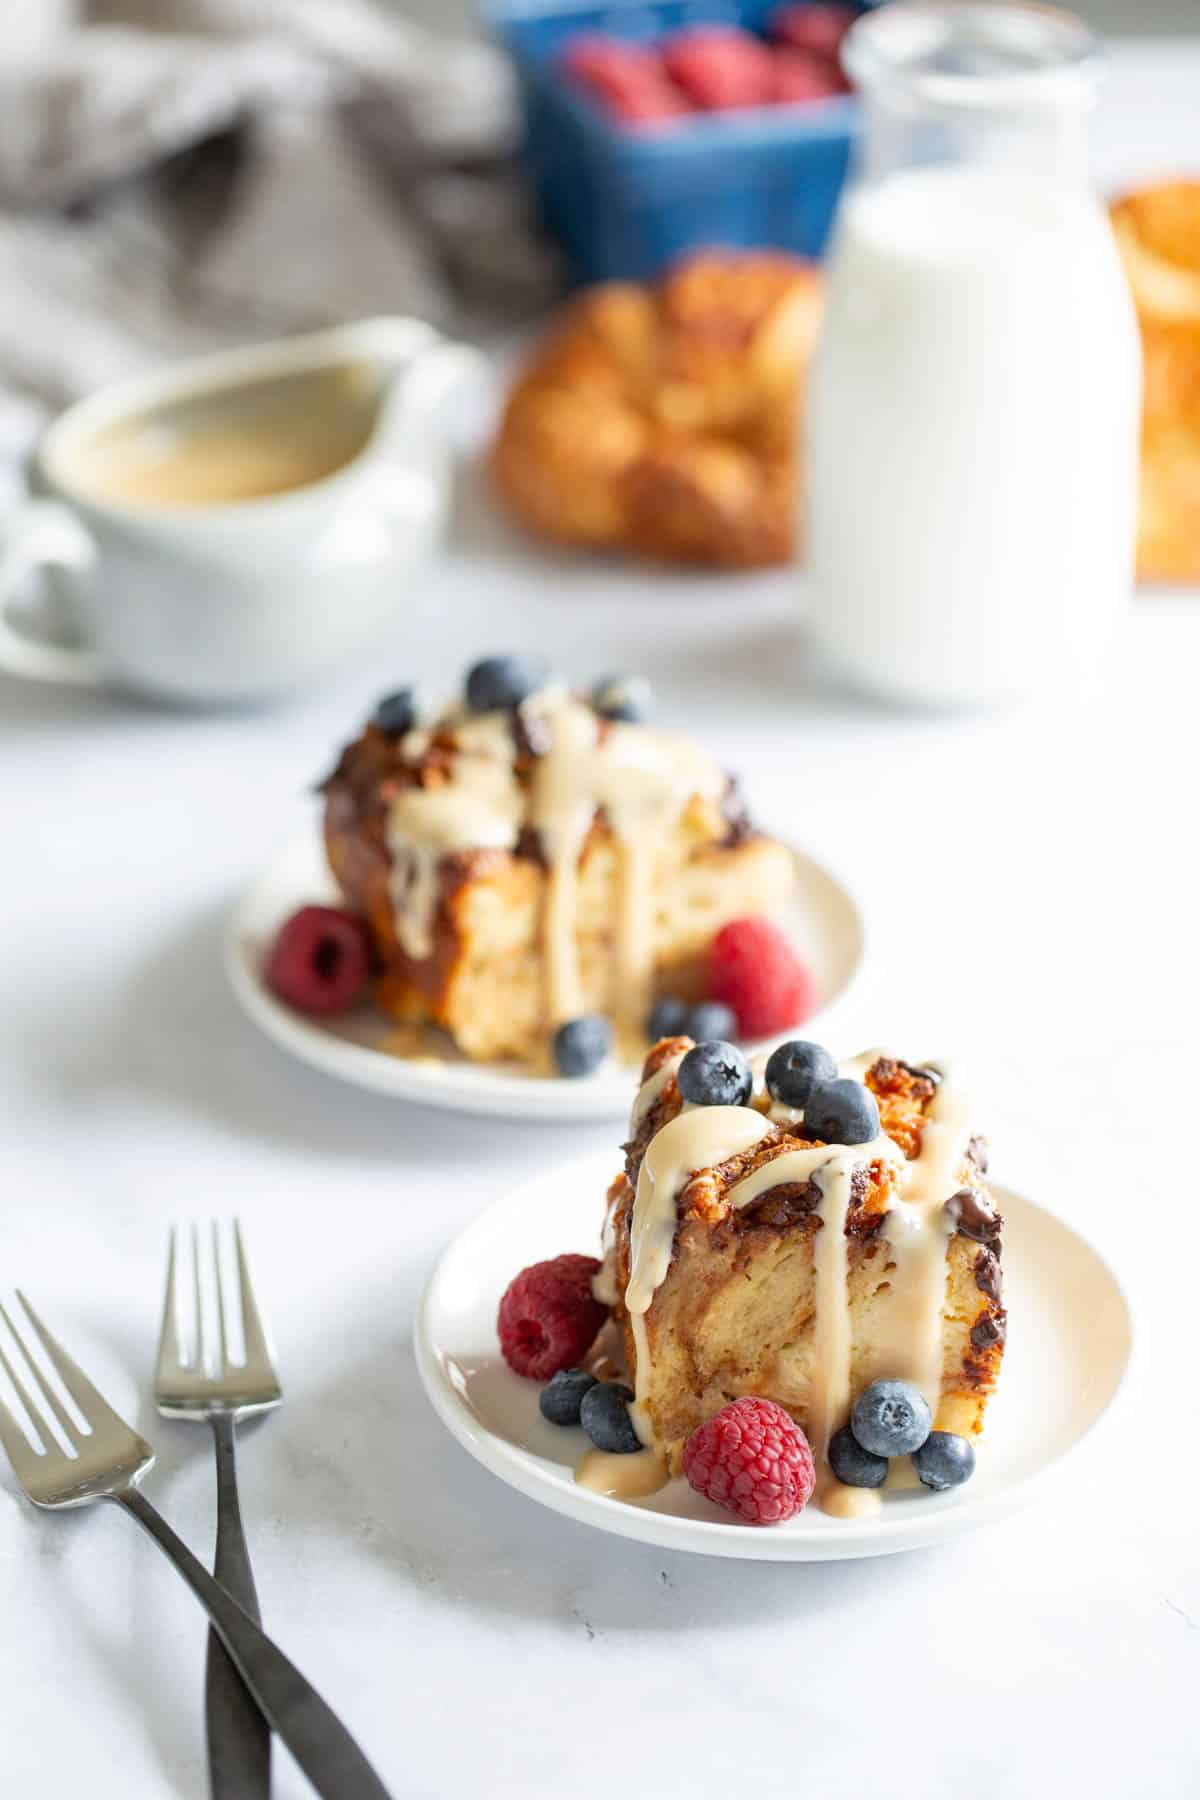 A plate with a slice of bread pudding topped with vanilla sauce and fresh blueberries and raspberries, alongside a cup of coffee and a glass of milk.